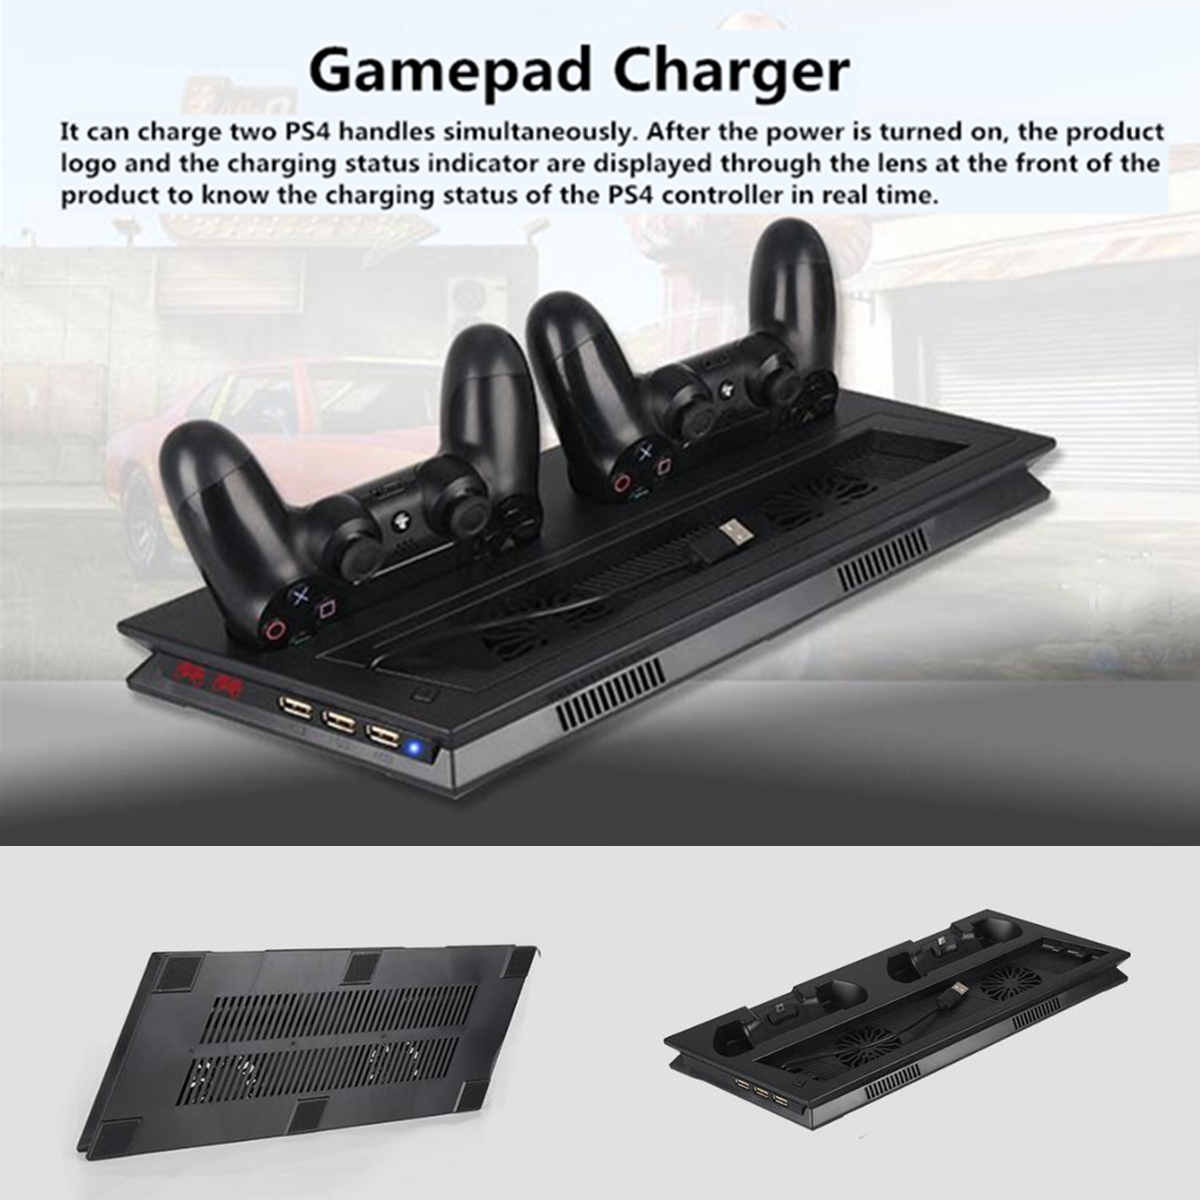 LED Charger Station Stand Charging Dock Cooling Fan for Sony Playstation 4 PS4 PRO Slim Game Console Gamepad 77